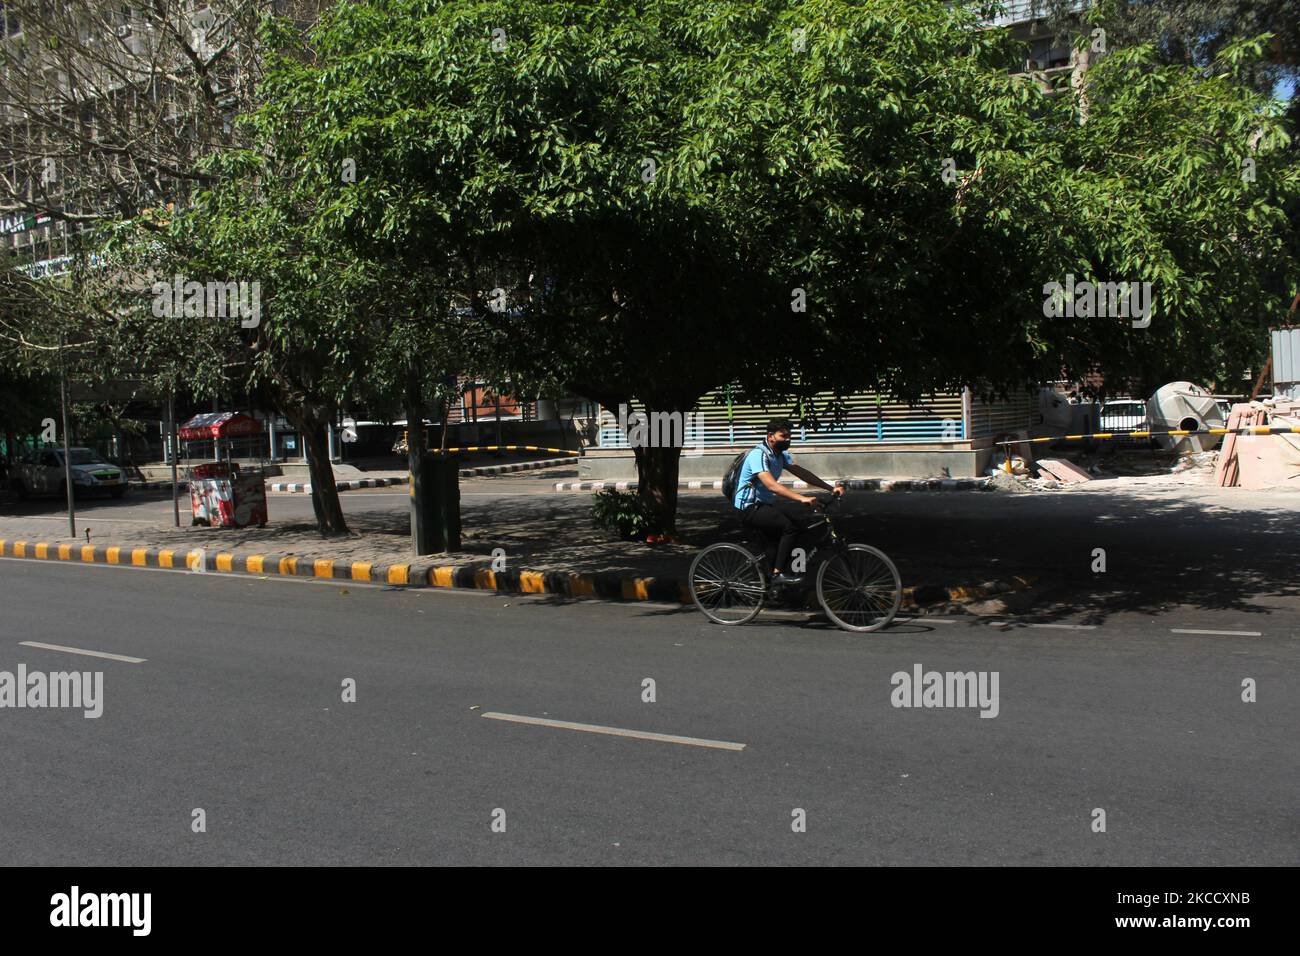 A cyclist pedals past a deserted street during a weekend lockdown in New Delhi, India on April 17, 2021. India on Saturday reported 2,34,692 new Covid-19 cases and 1,341 deaths in the last 24 hours, according to data from the Union Health Ministry. (Photo by Mayank Makhija/NurPhoto) Stock Photo